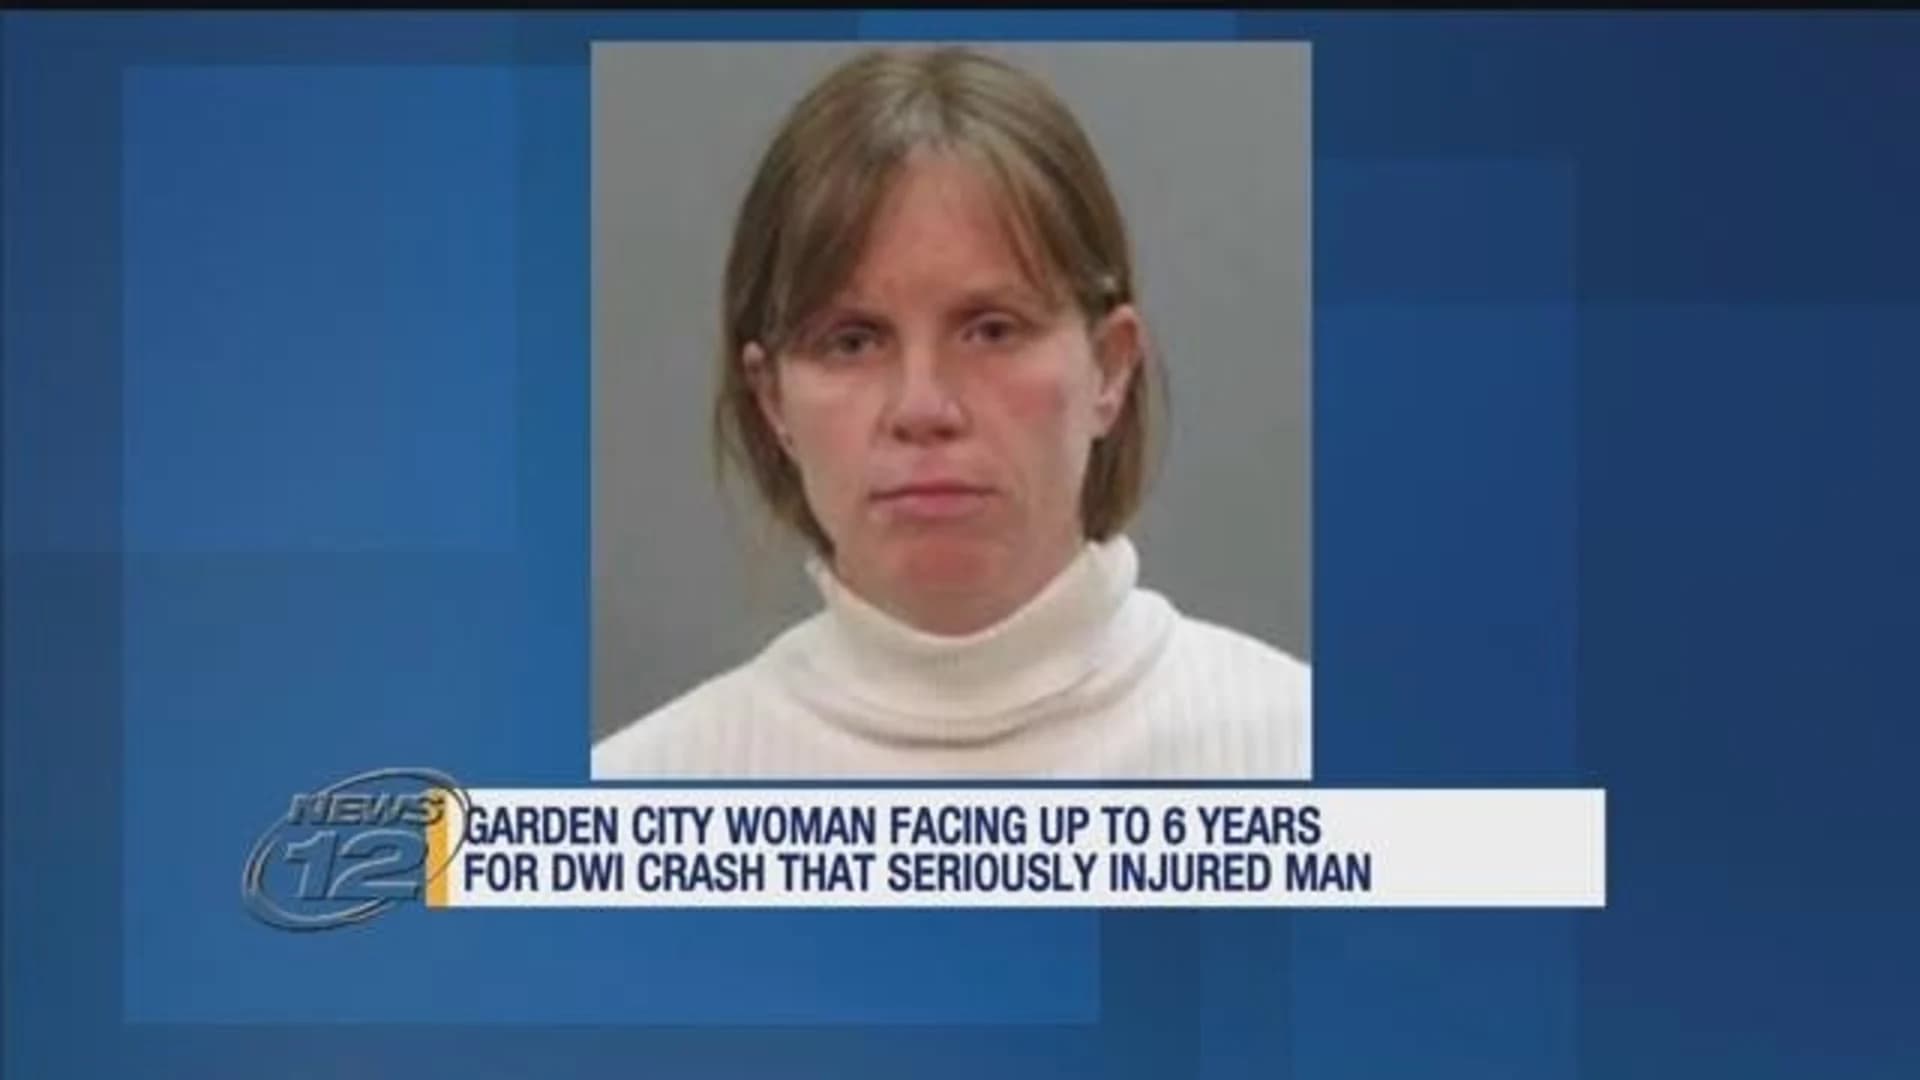 Sentencing postponed for Garden City woman accused of DWI